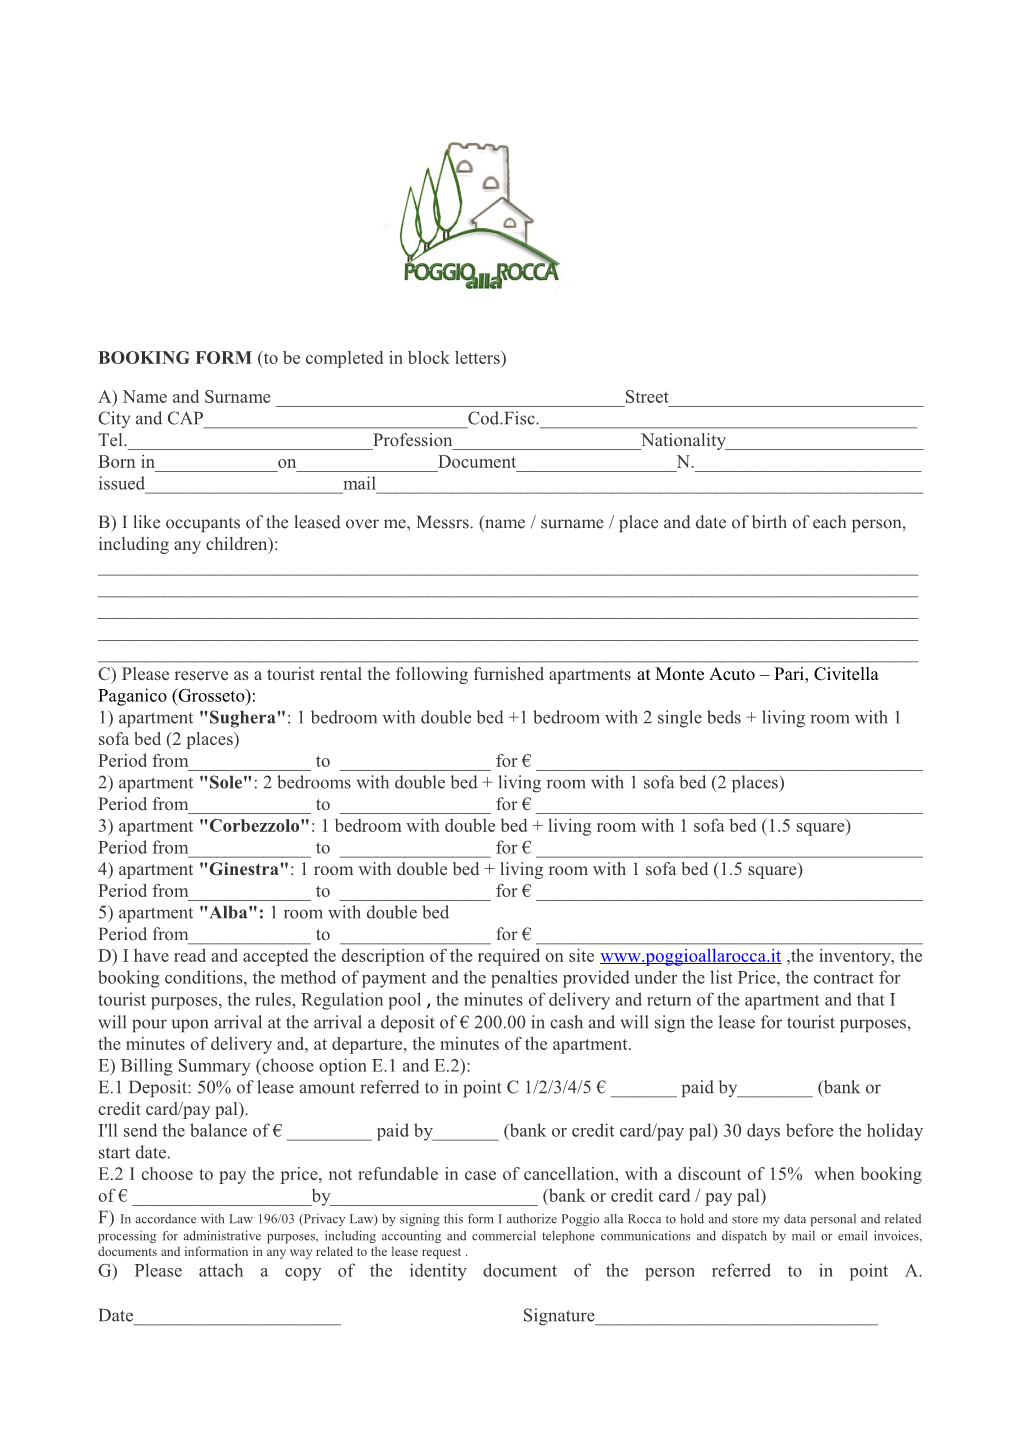 BOOKING FORM (To Be Completed in Block Letters)